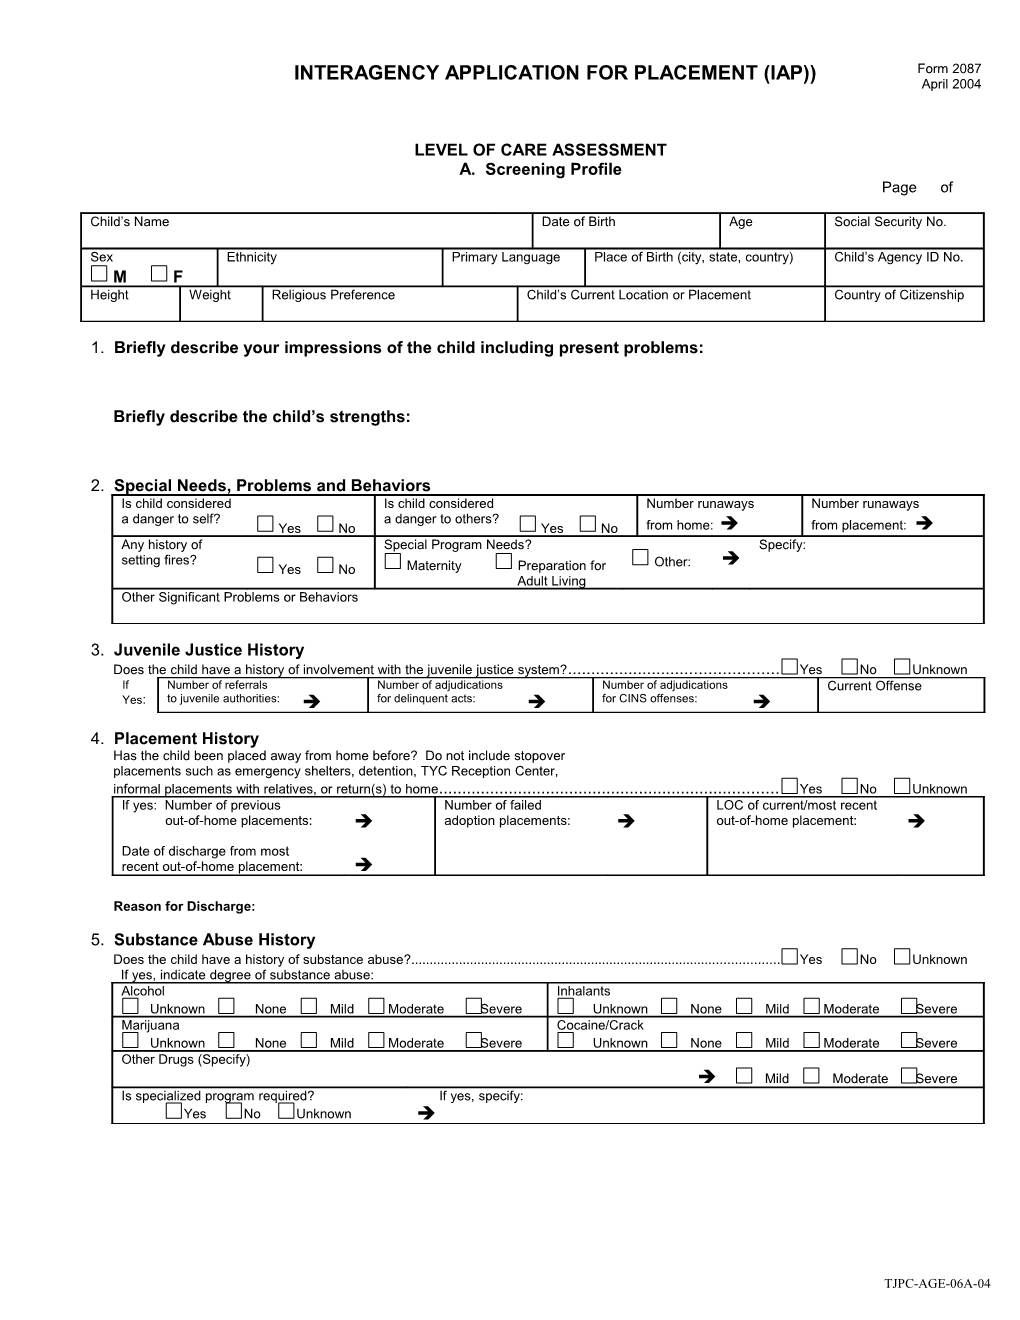 TJPC-AGE-06A-04 Interagency Application for Placement